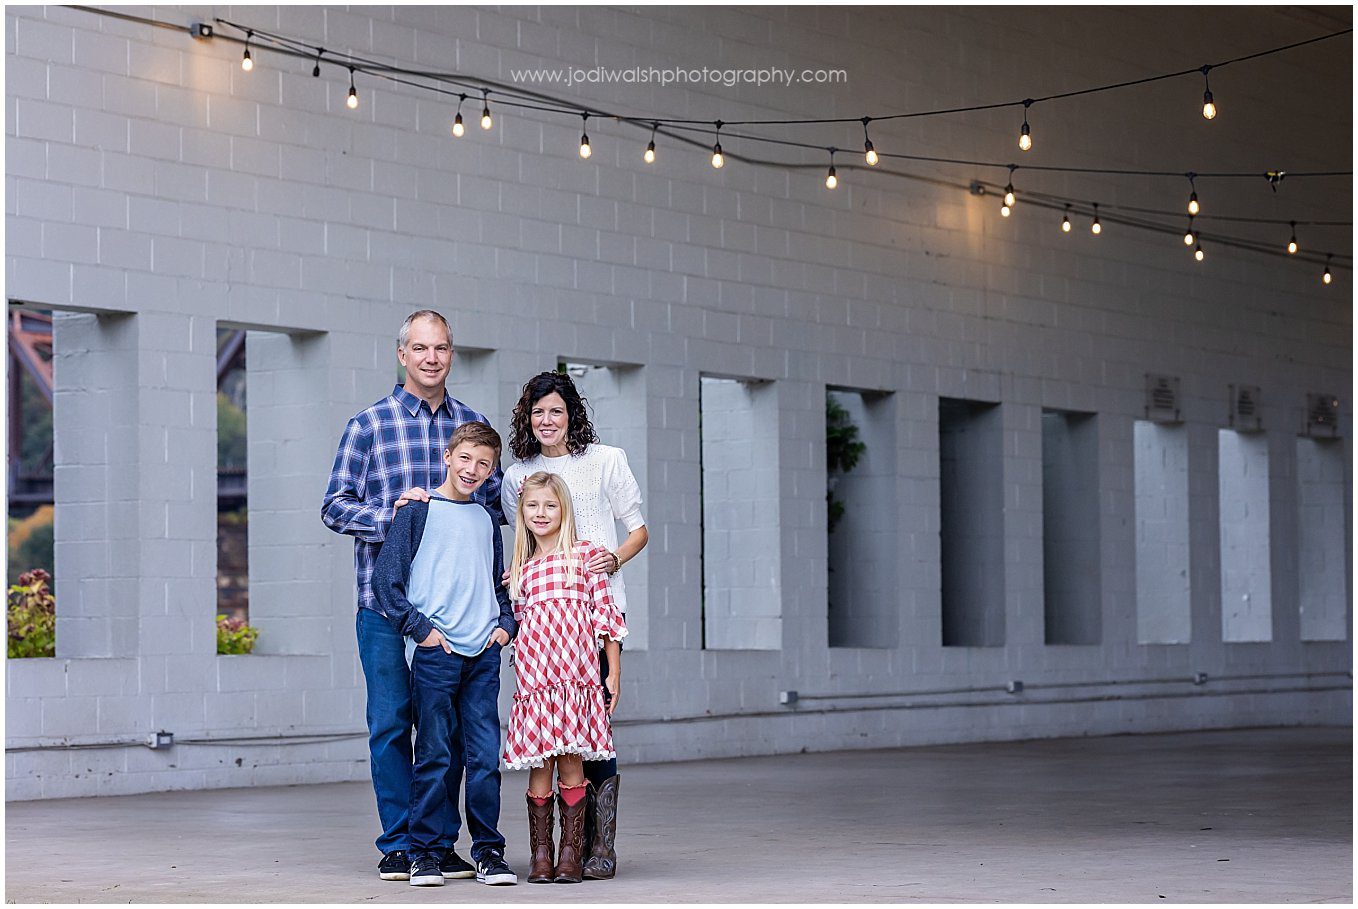 image of a family (mom, dad, boy and girl) standing in a stone pavilion with twinkle lights strung across the ceiling in Allegheny RiverTrail Park.